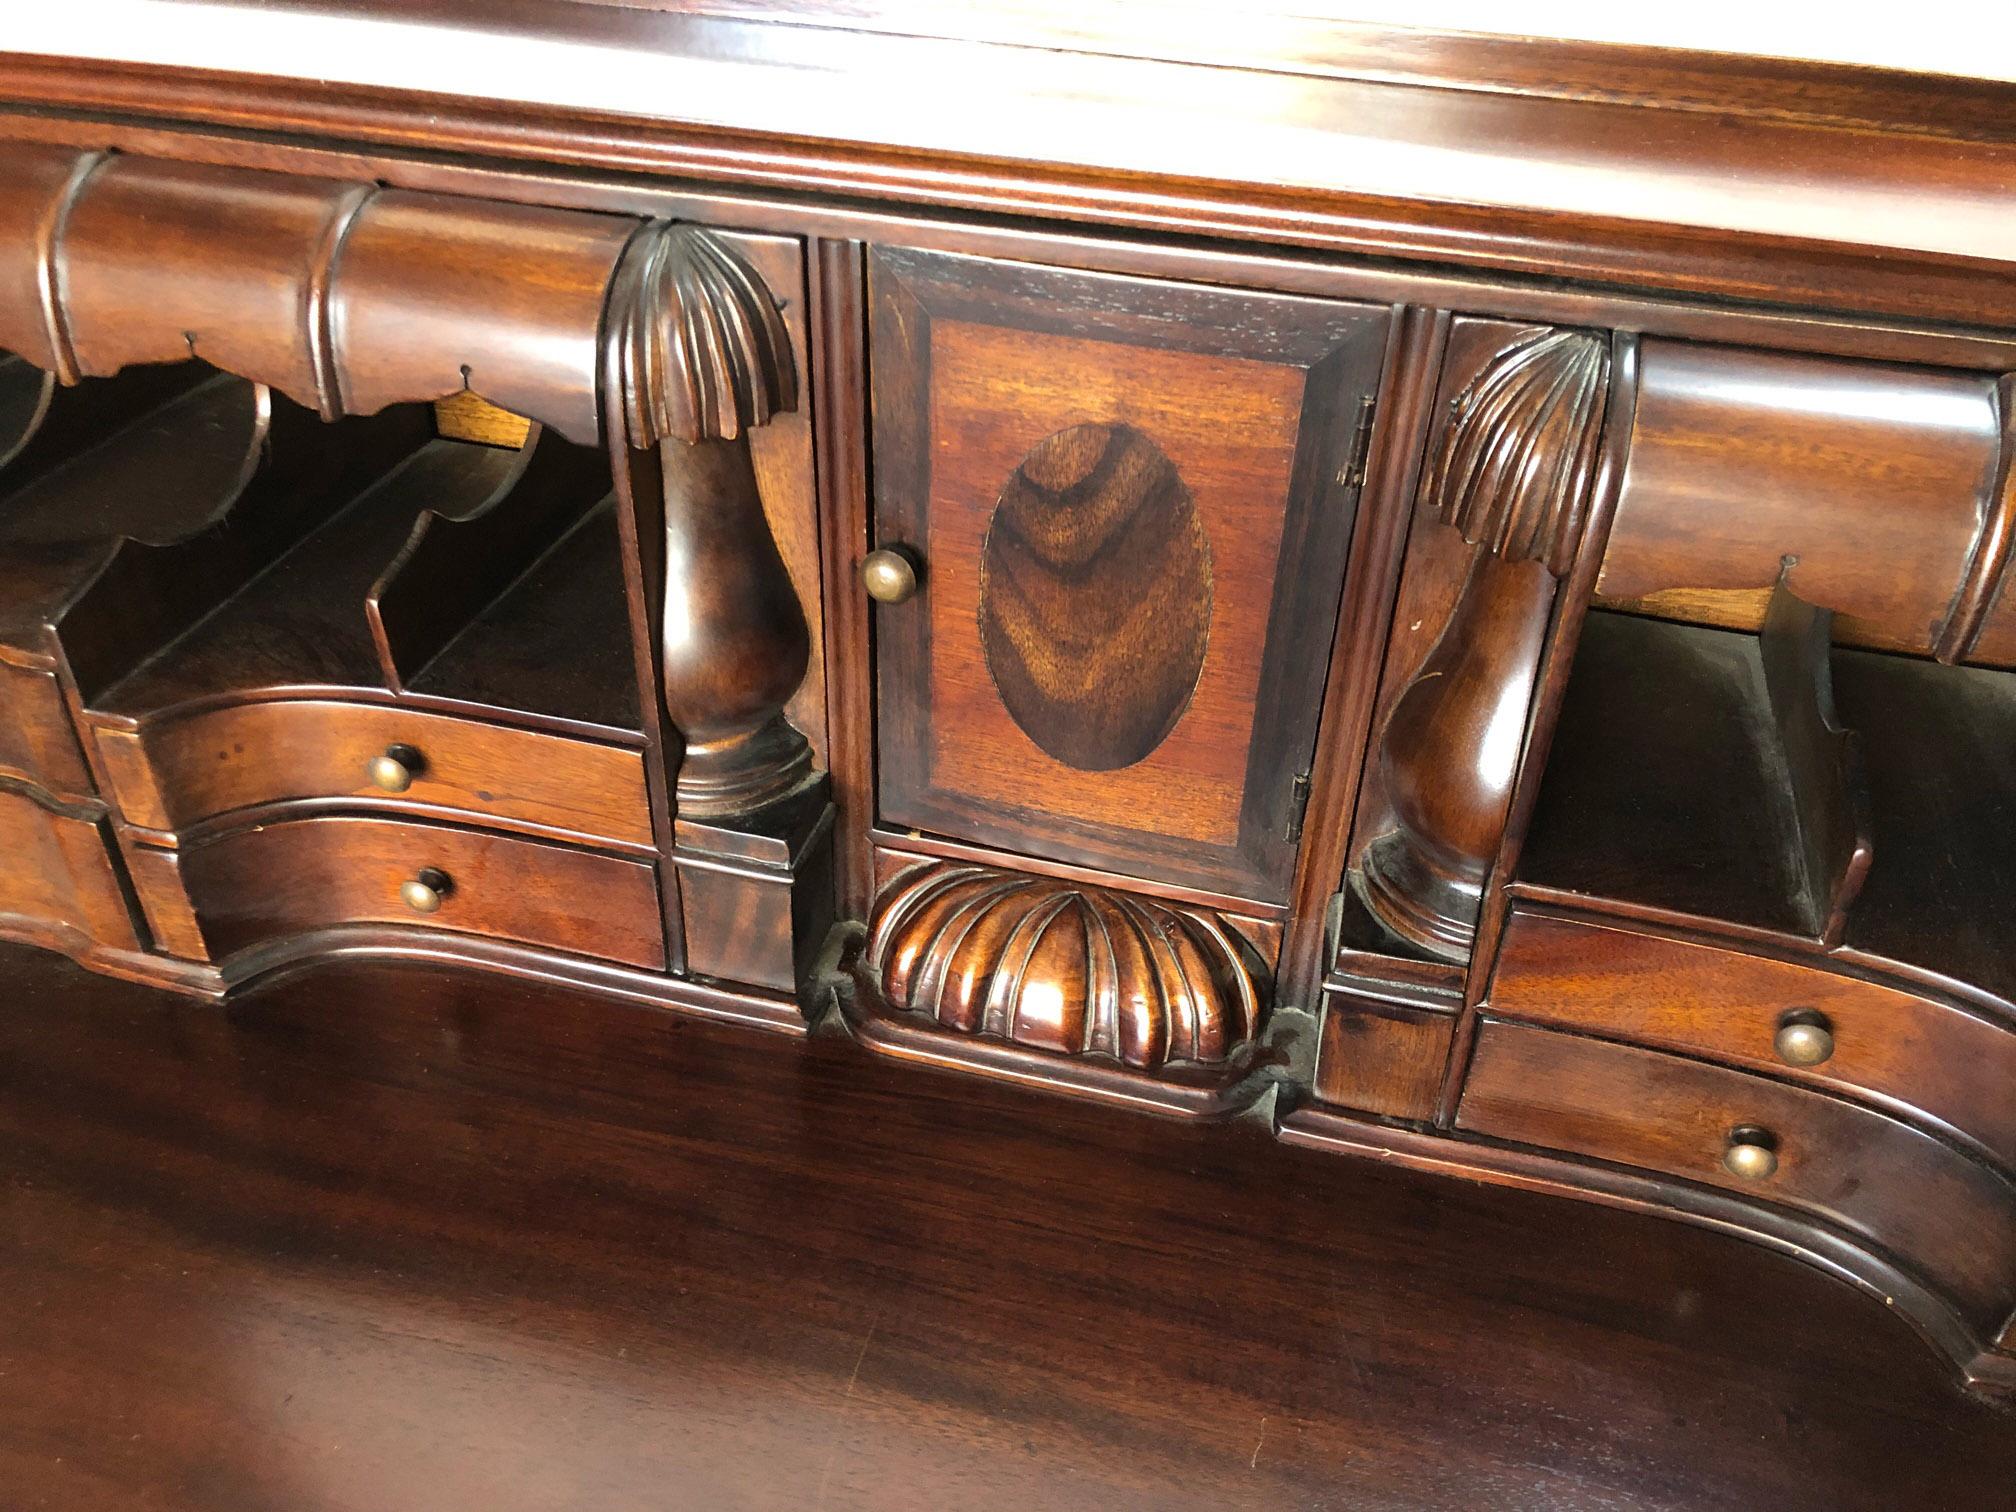 Regency Revival Solid Mahogany Desk, with Secret Drawers, Shellac Finish